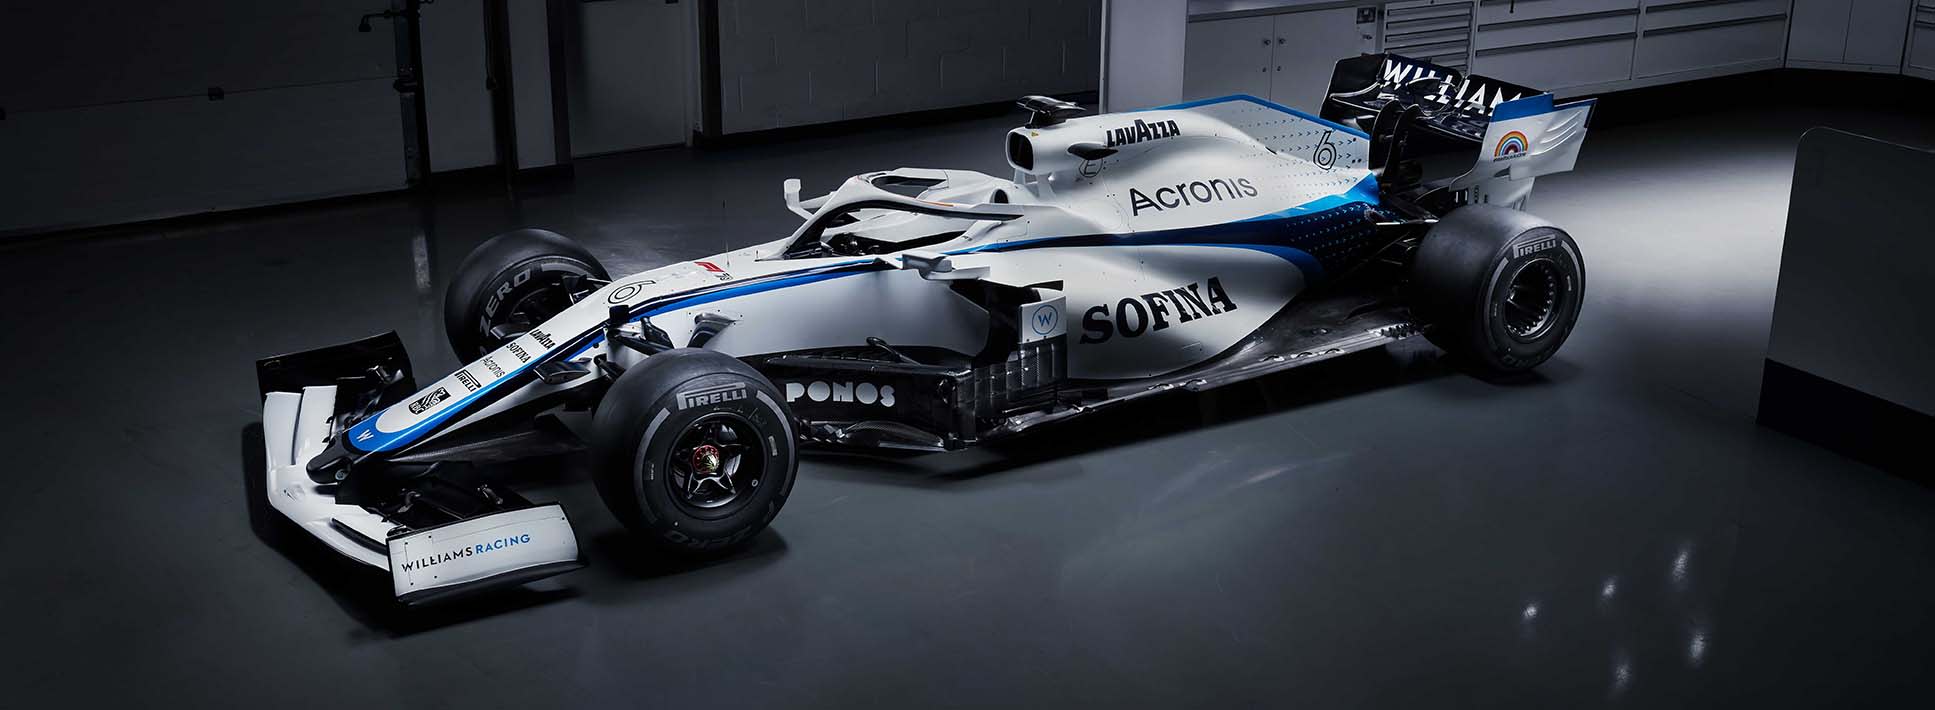 Williams announces the ale of F1 team to US investment company